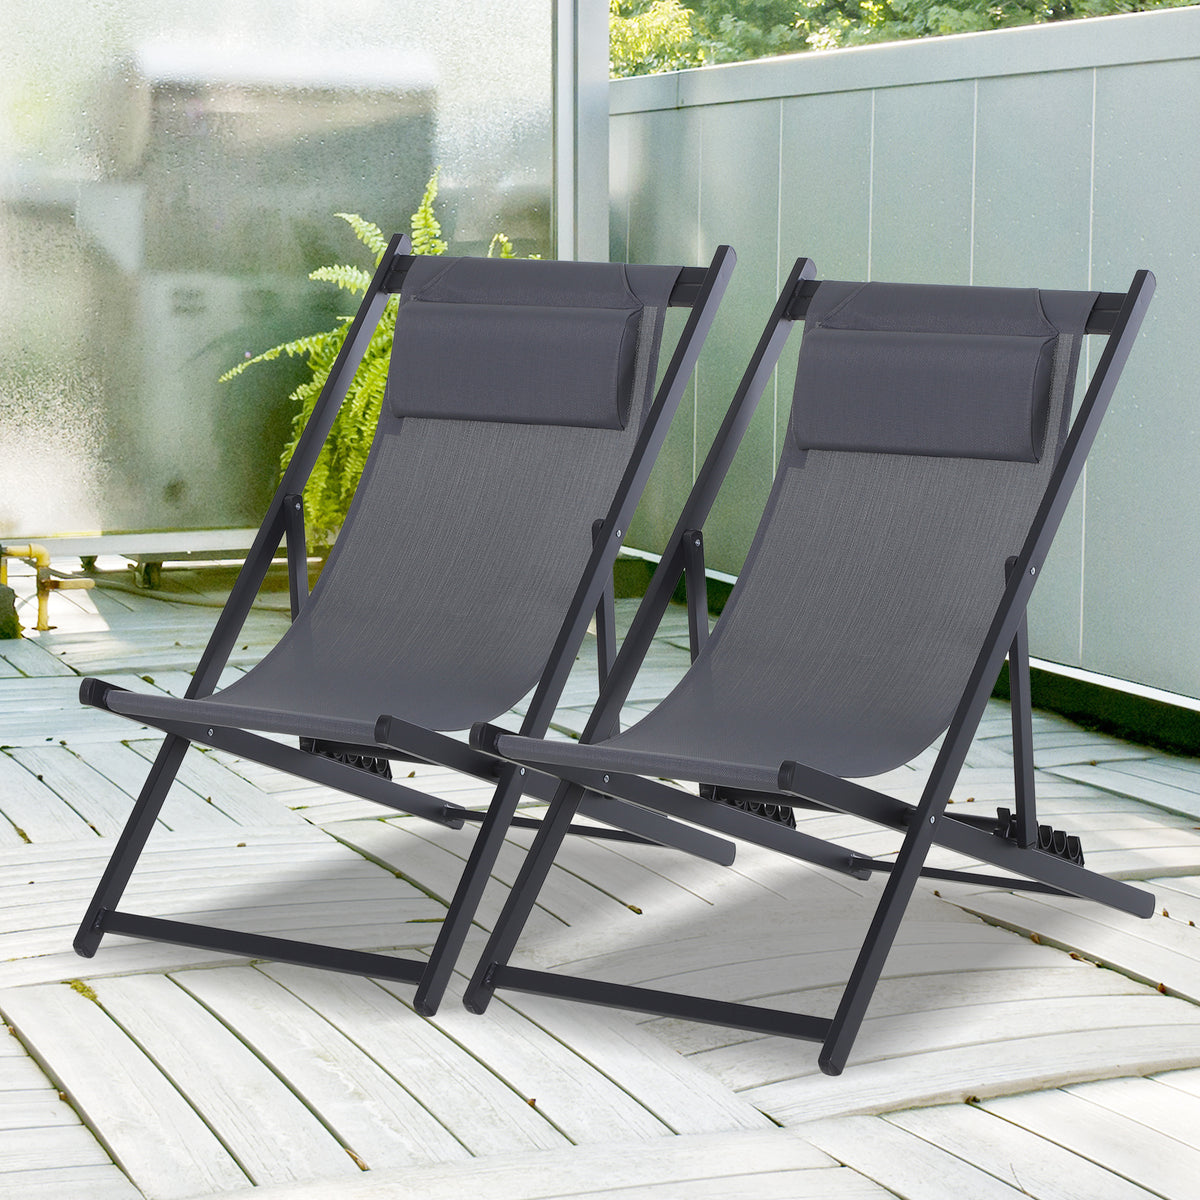 Outsunny Set of 2 Garden Sun Lounger Outdoor Reclining Seat Cushioned Seat